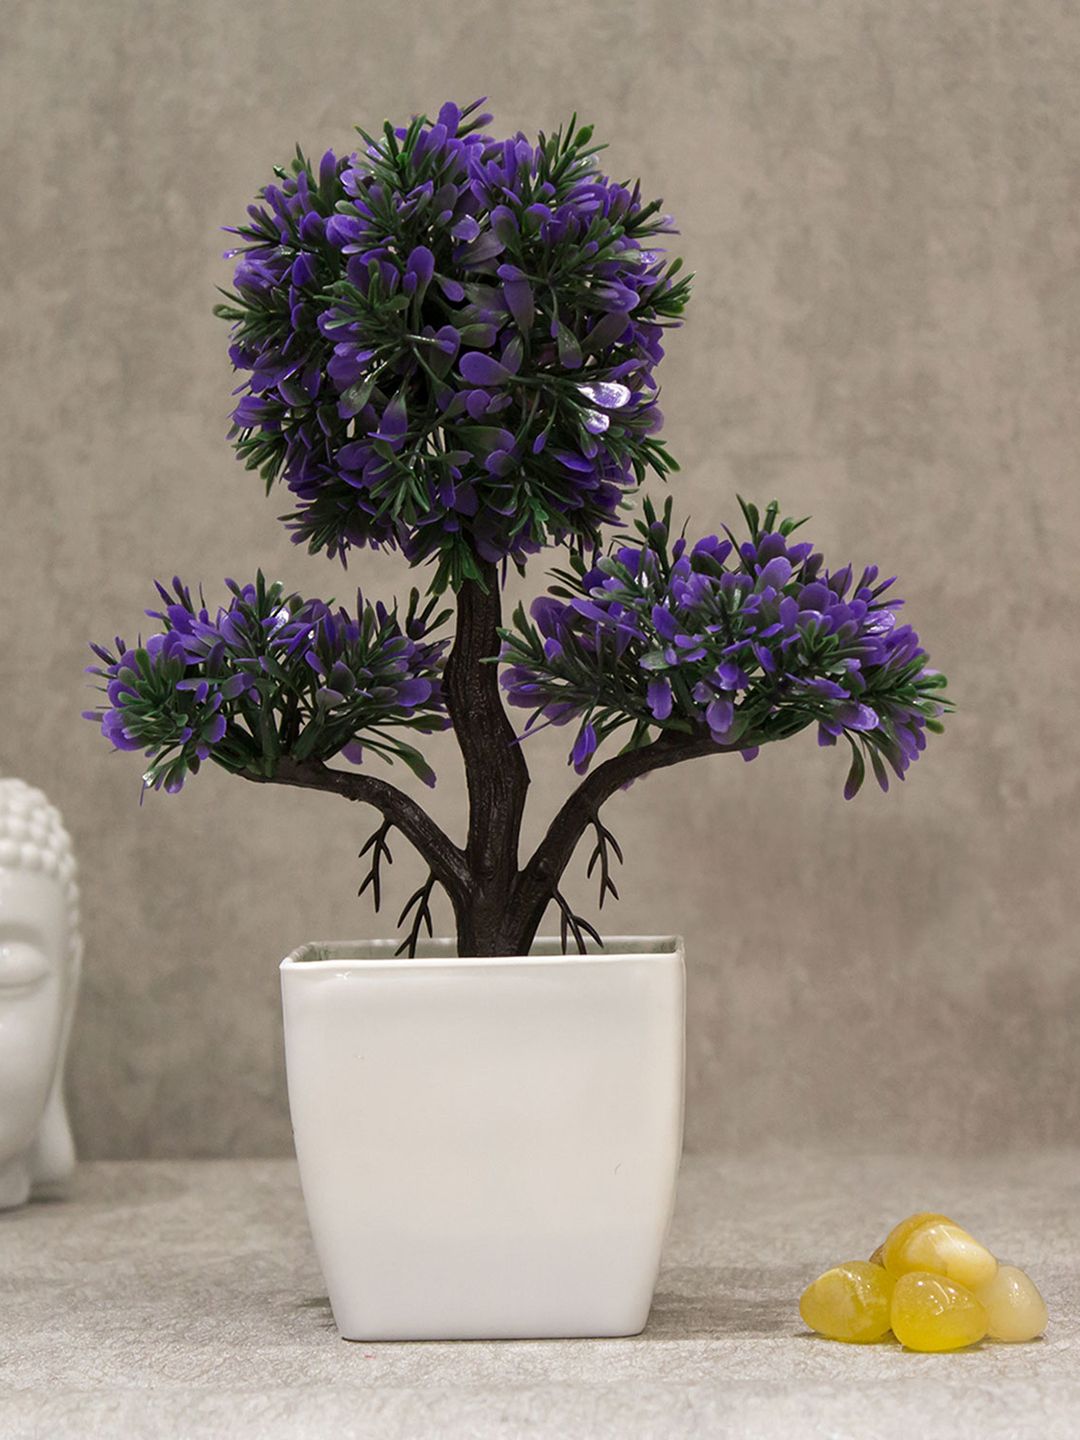 AMFLIX Bonsai Artificial Flowers & Plants With Pot Price in India